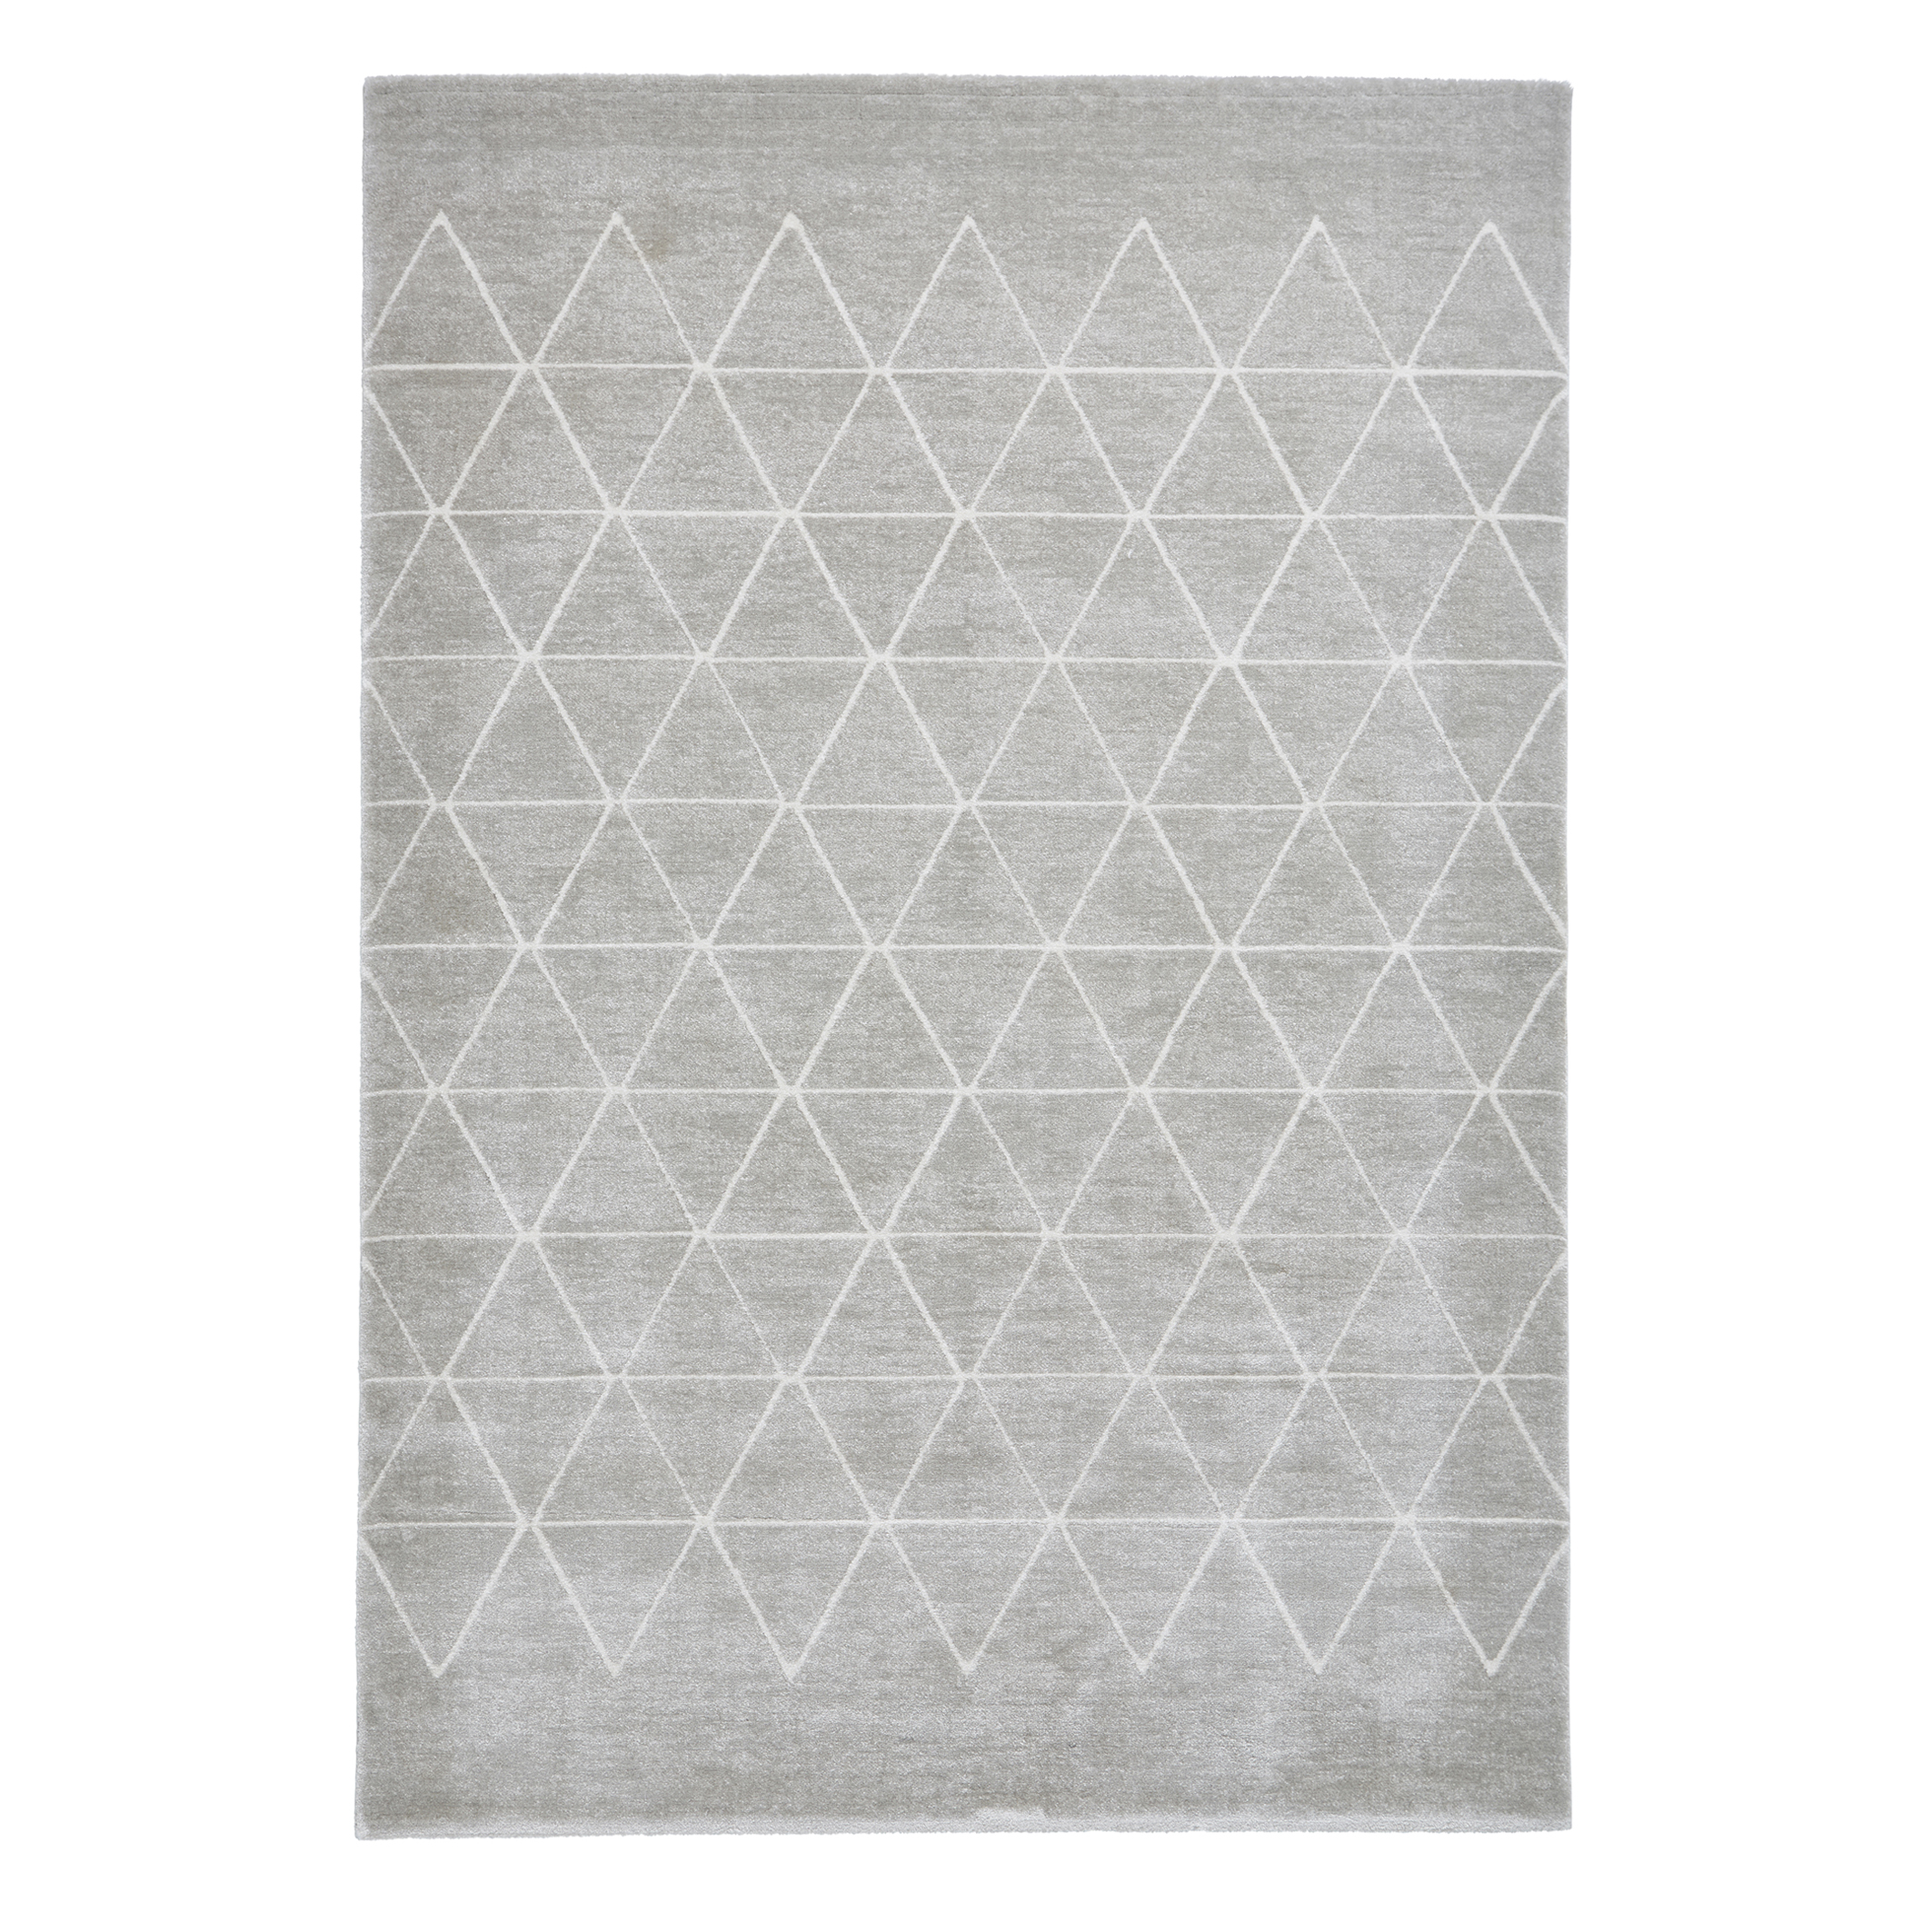 Triangle Geometric Patterned Rug Grey, Triangle Pattern Rug